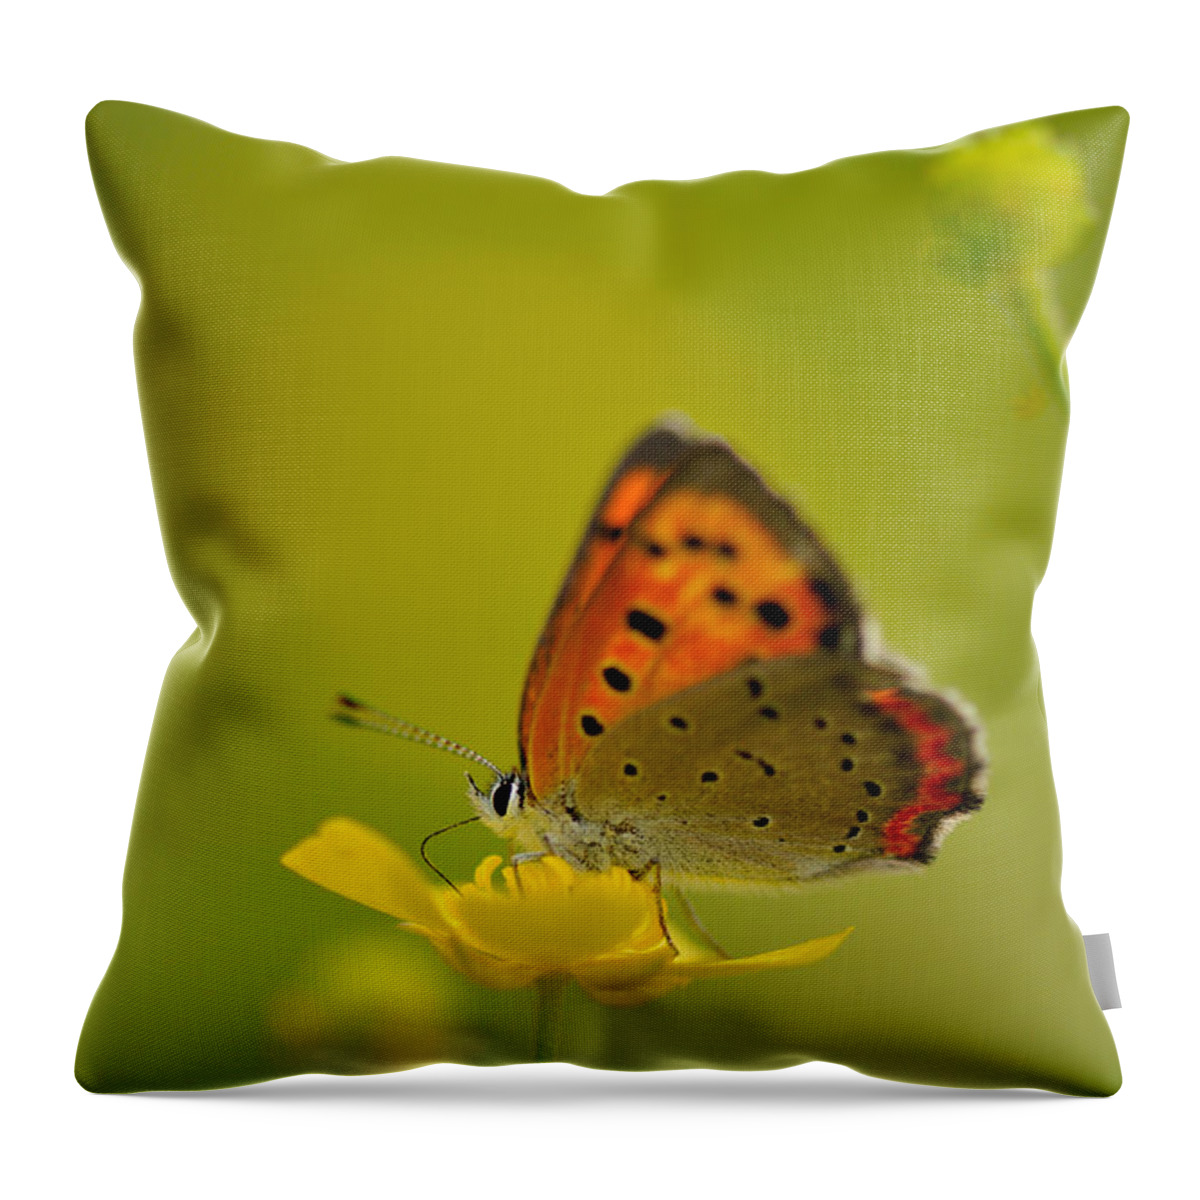 Insect Throw Pillow featuring the photograph Butterfly And Japanese Buttercup by Myu-myu